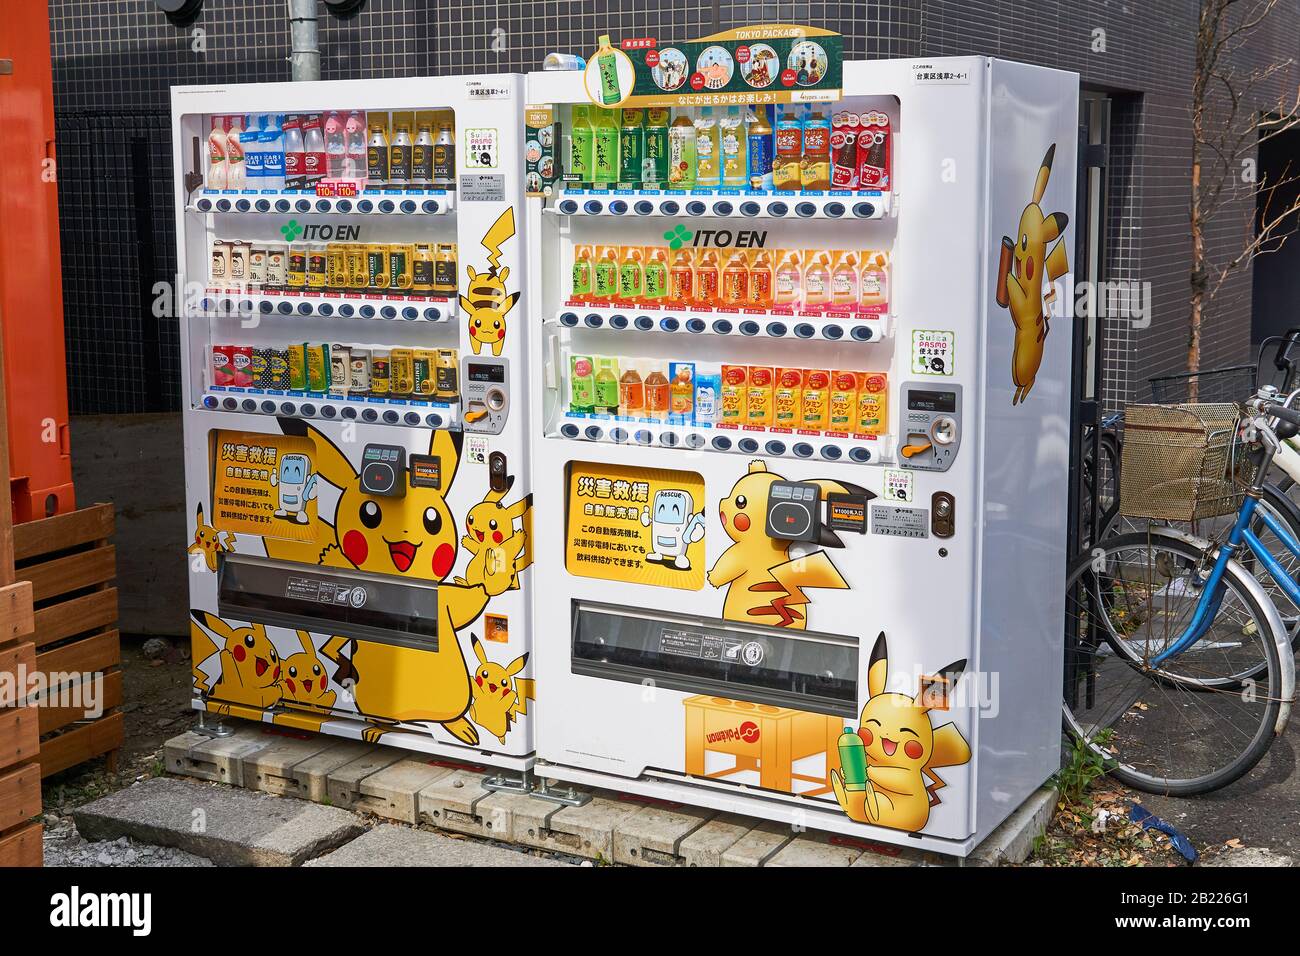 Two Japanese Vending Machines Of Itoen Beverages Covered In The Pokemon Character Pikachu In Asakusa Tokyo Japan Stock Photo Alamy